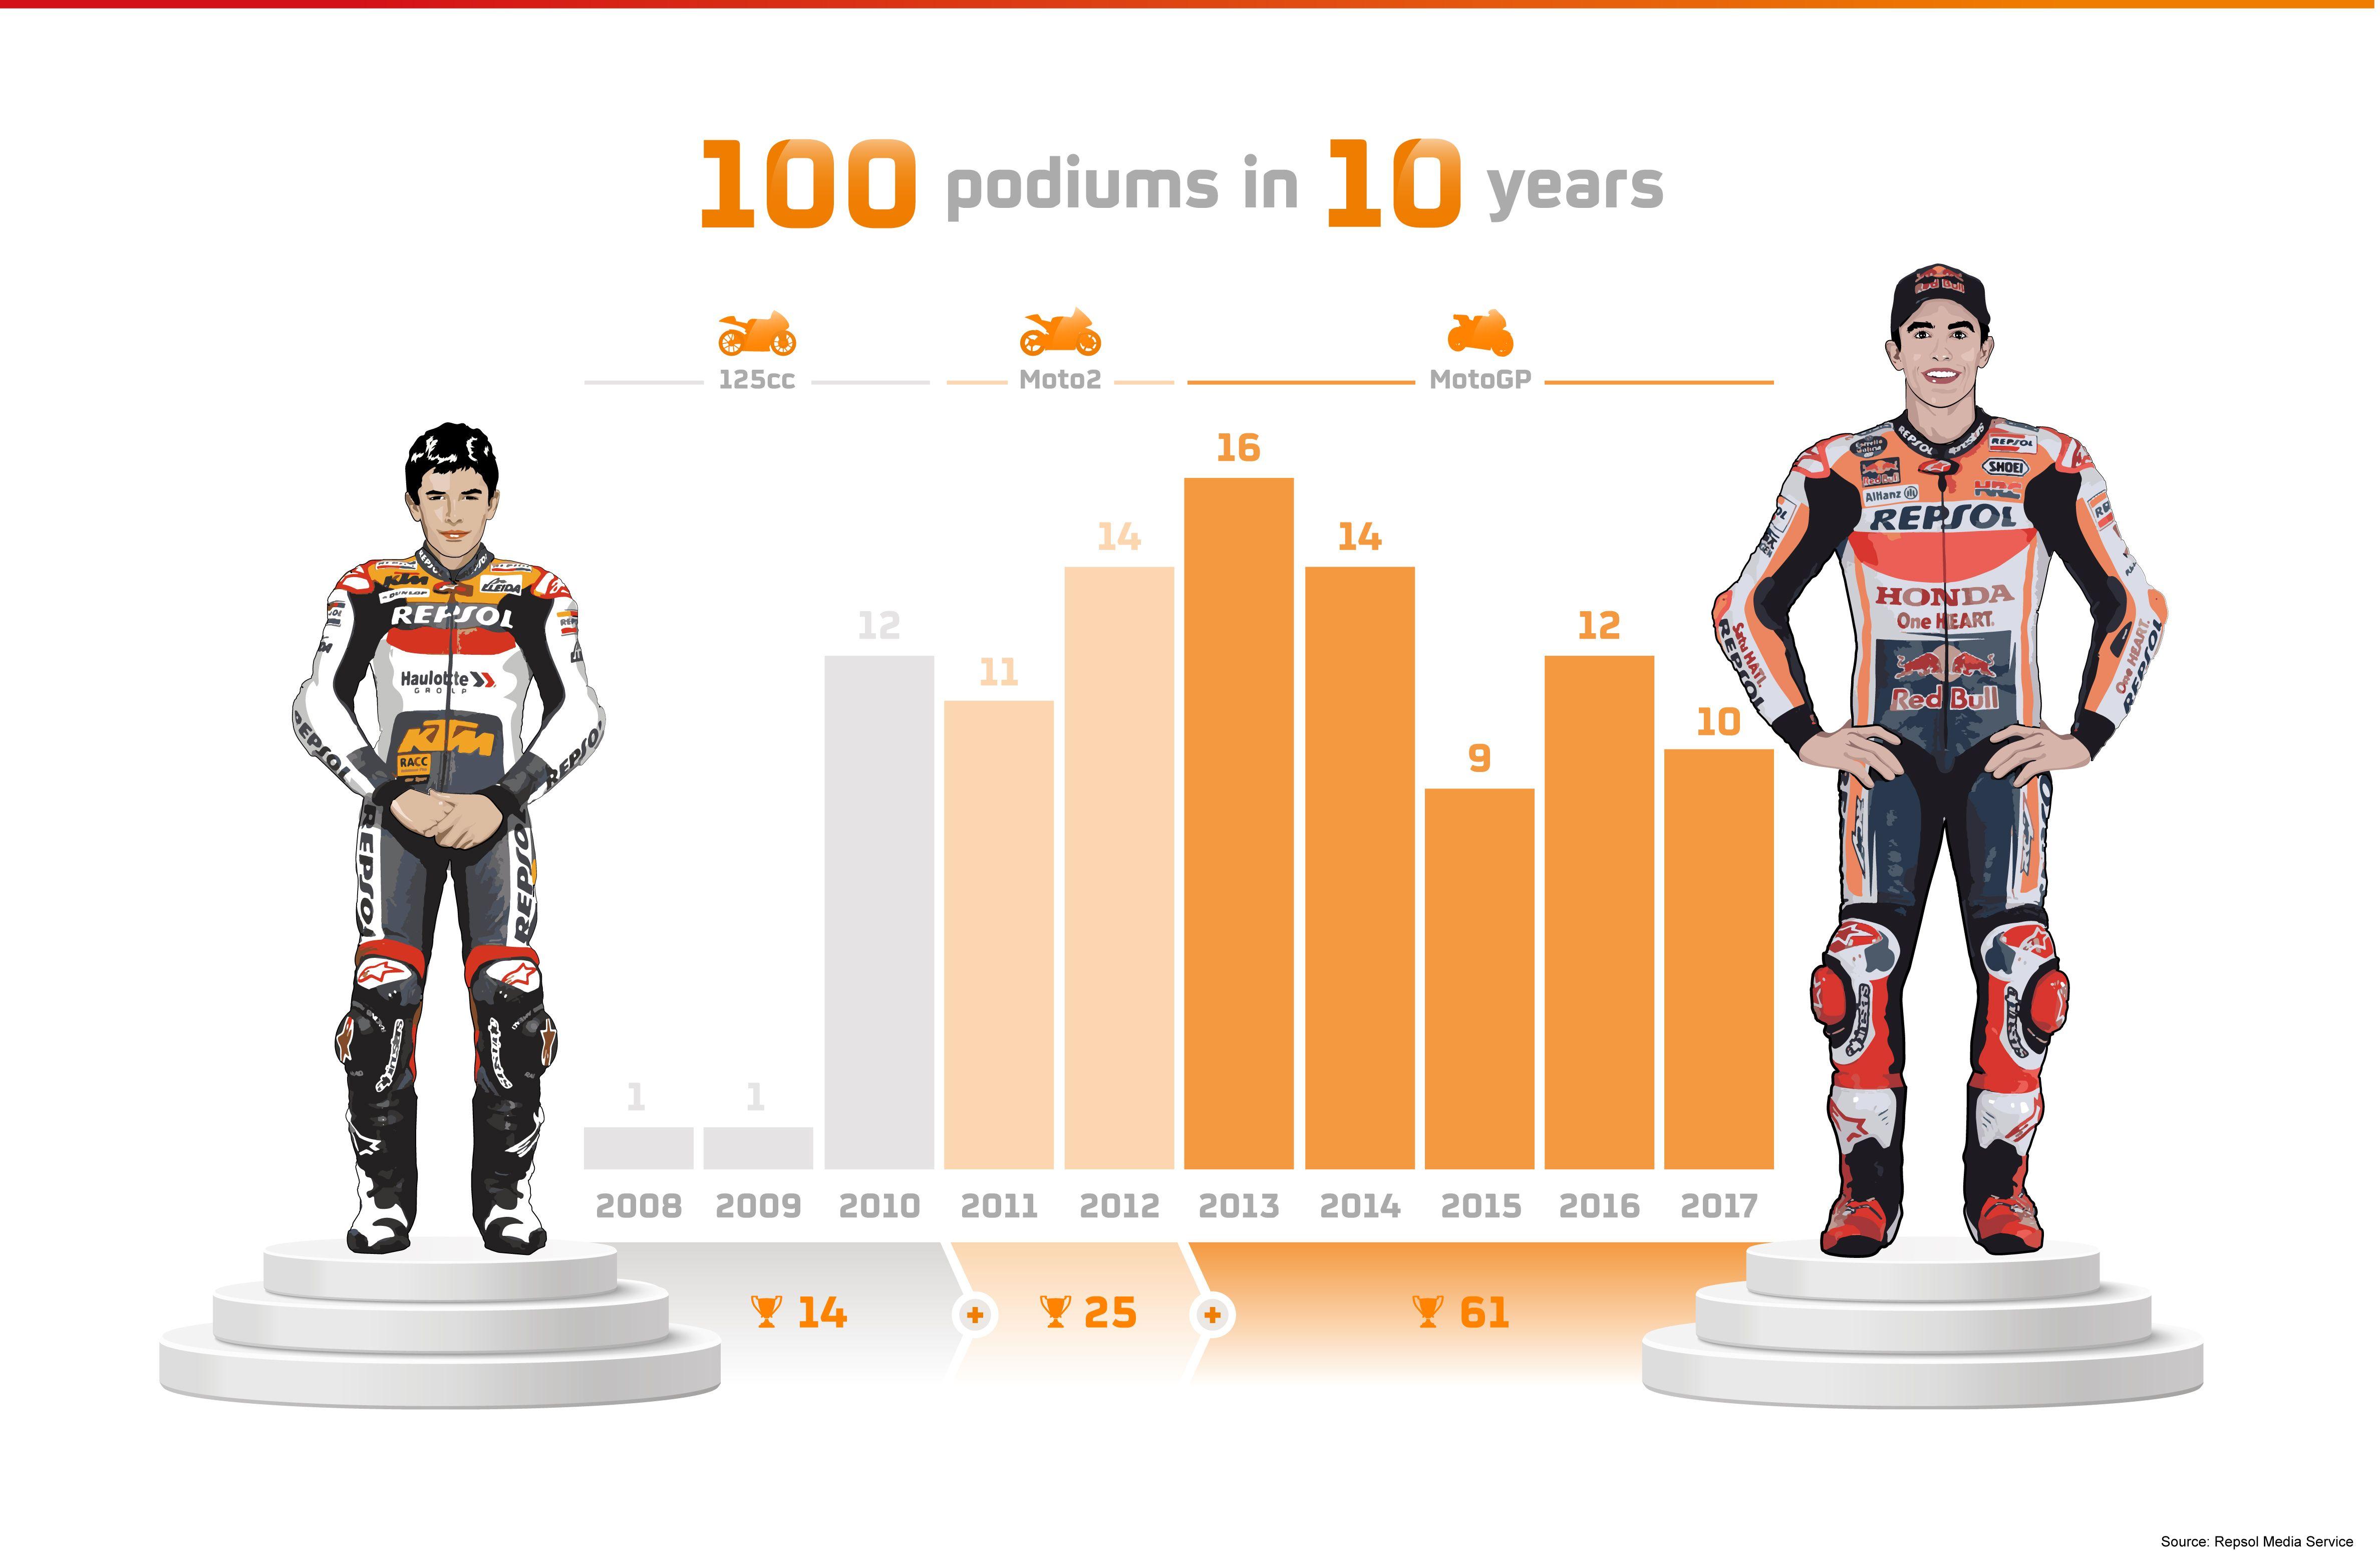 Marc Márquez becomes youngest rider to reach 100 podiums